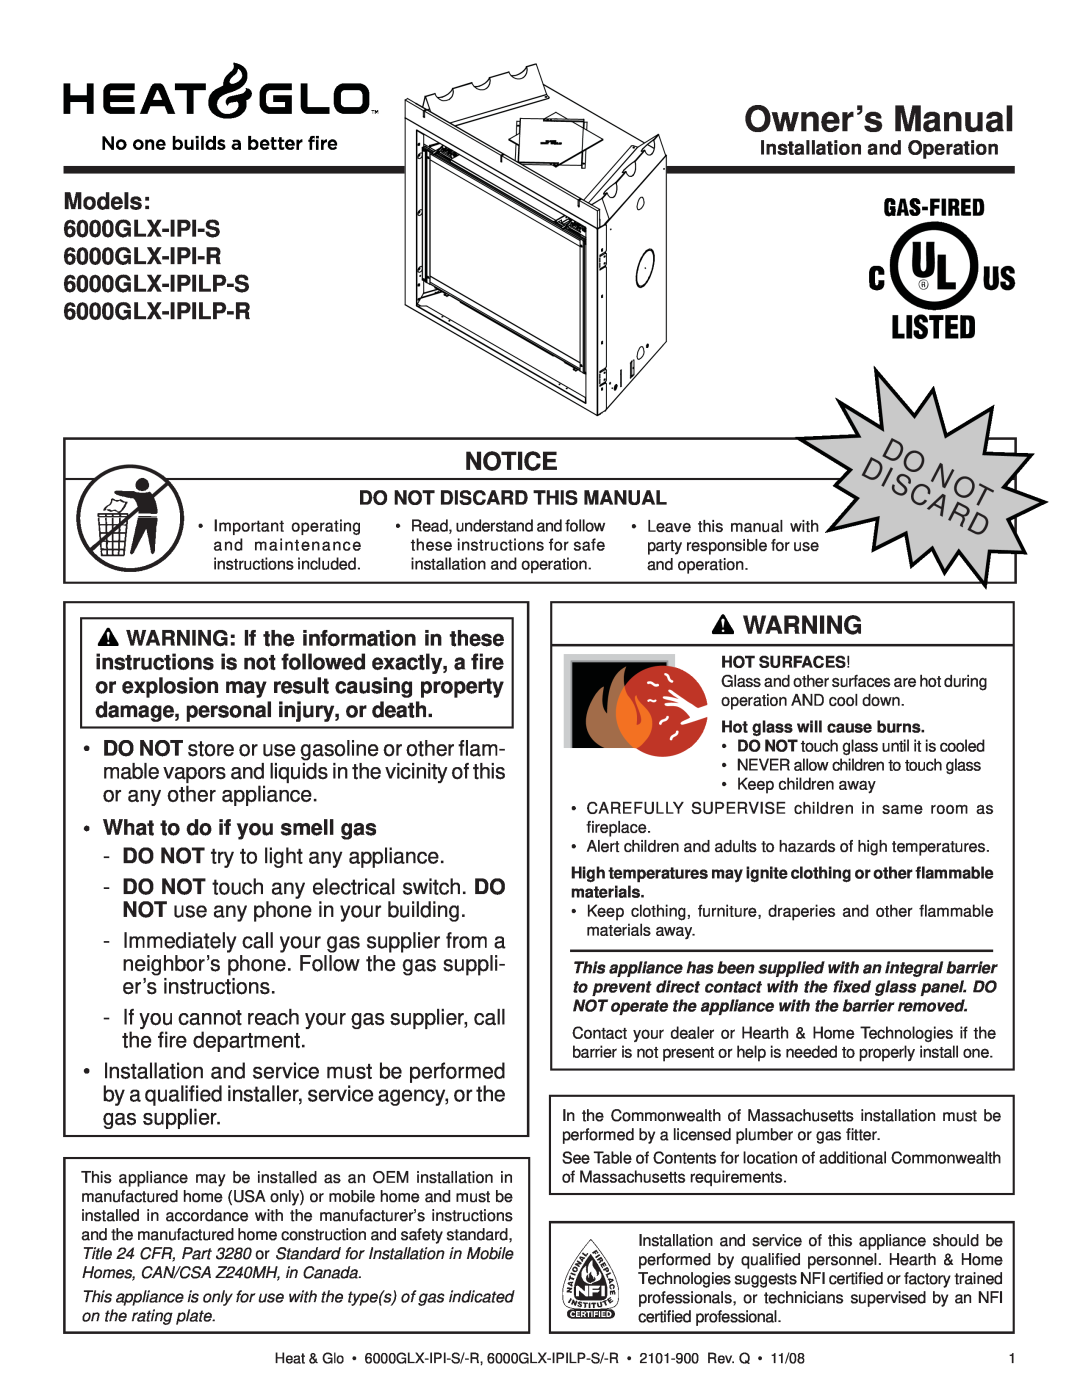 Heat & Glo LifeStyle 6000GLX-IPILP-S/-R owner manual Notice, •What to do if you smell gas, Owner’s Manual 